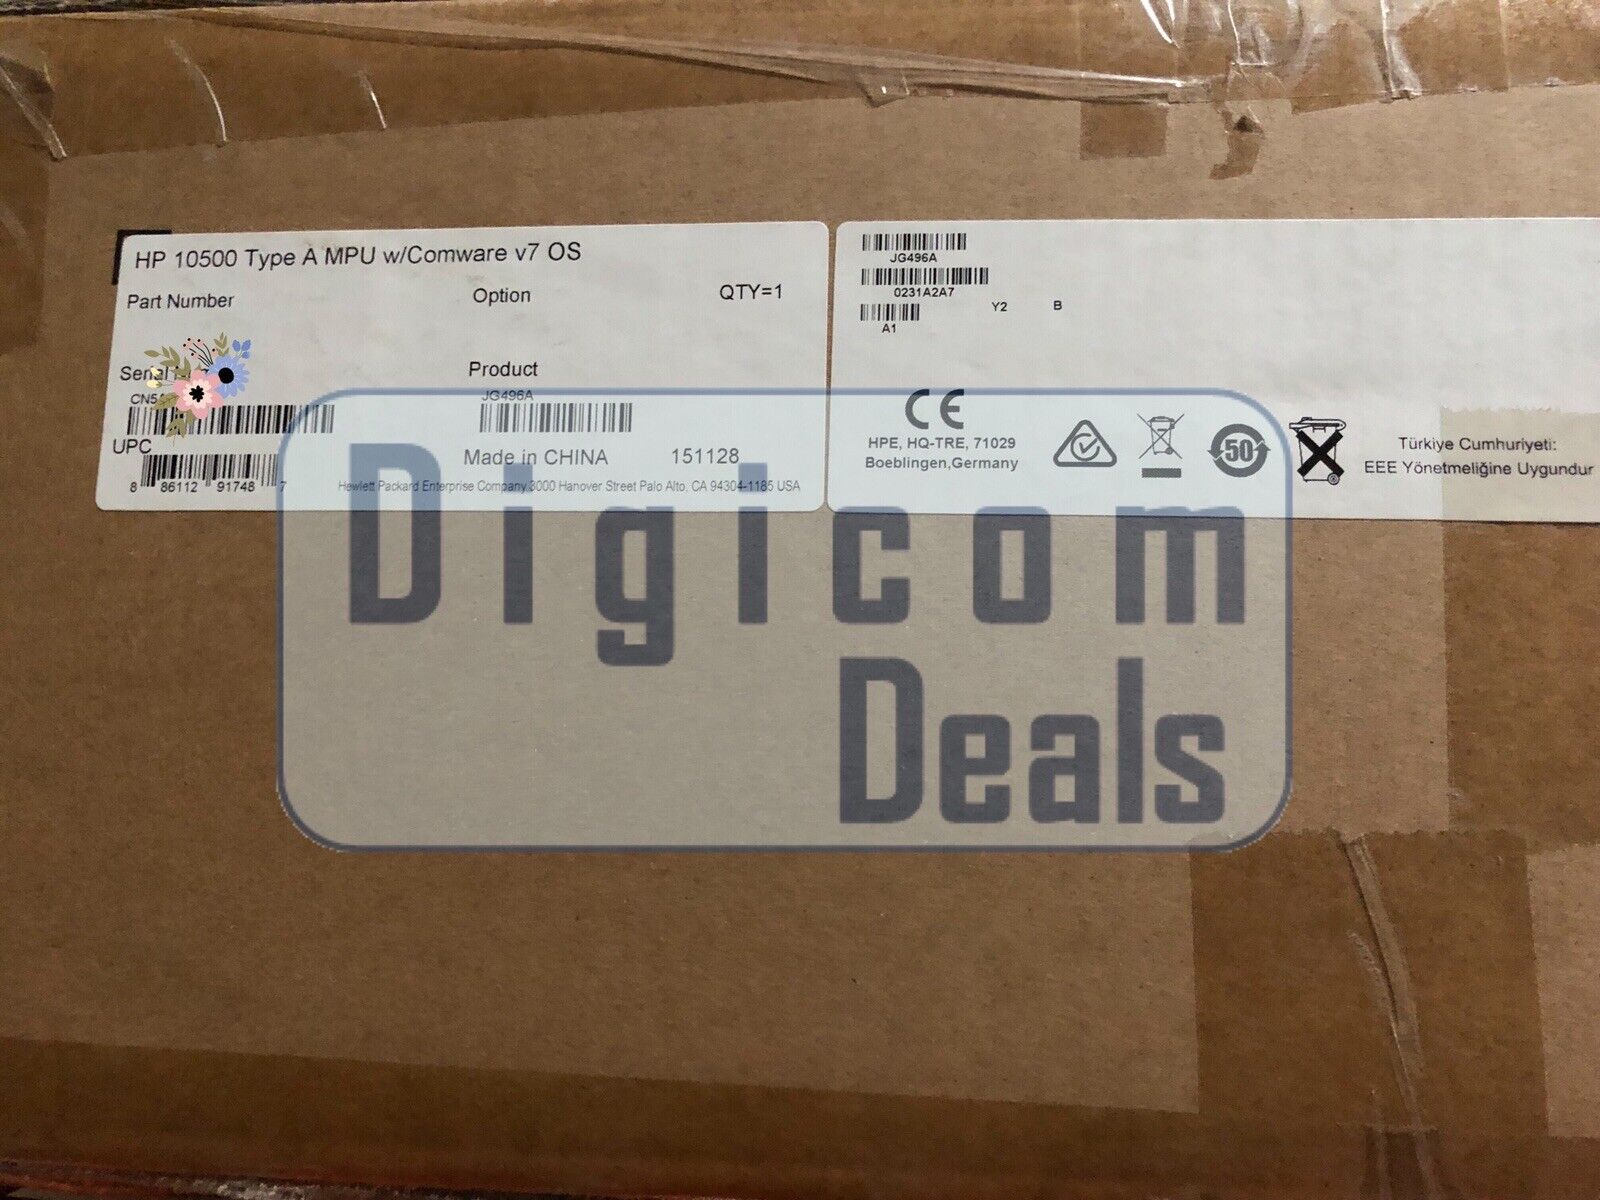 *New Retail F/S* JG496A HPE 10500 Type A Main Processing Unit with Comware v7 OS